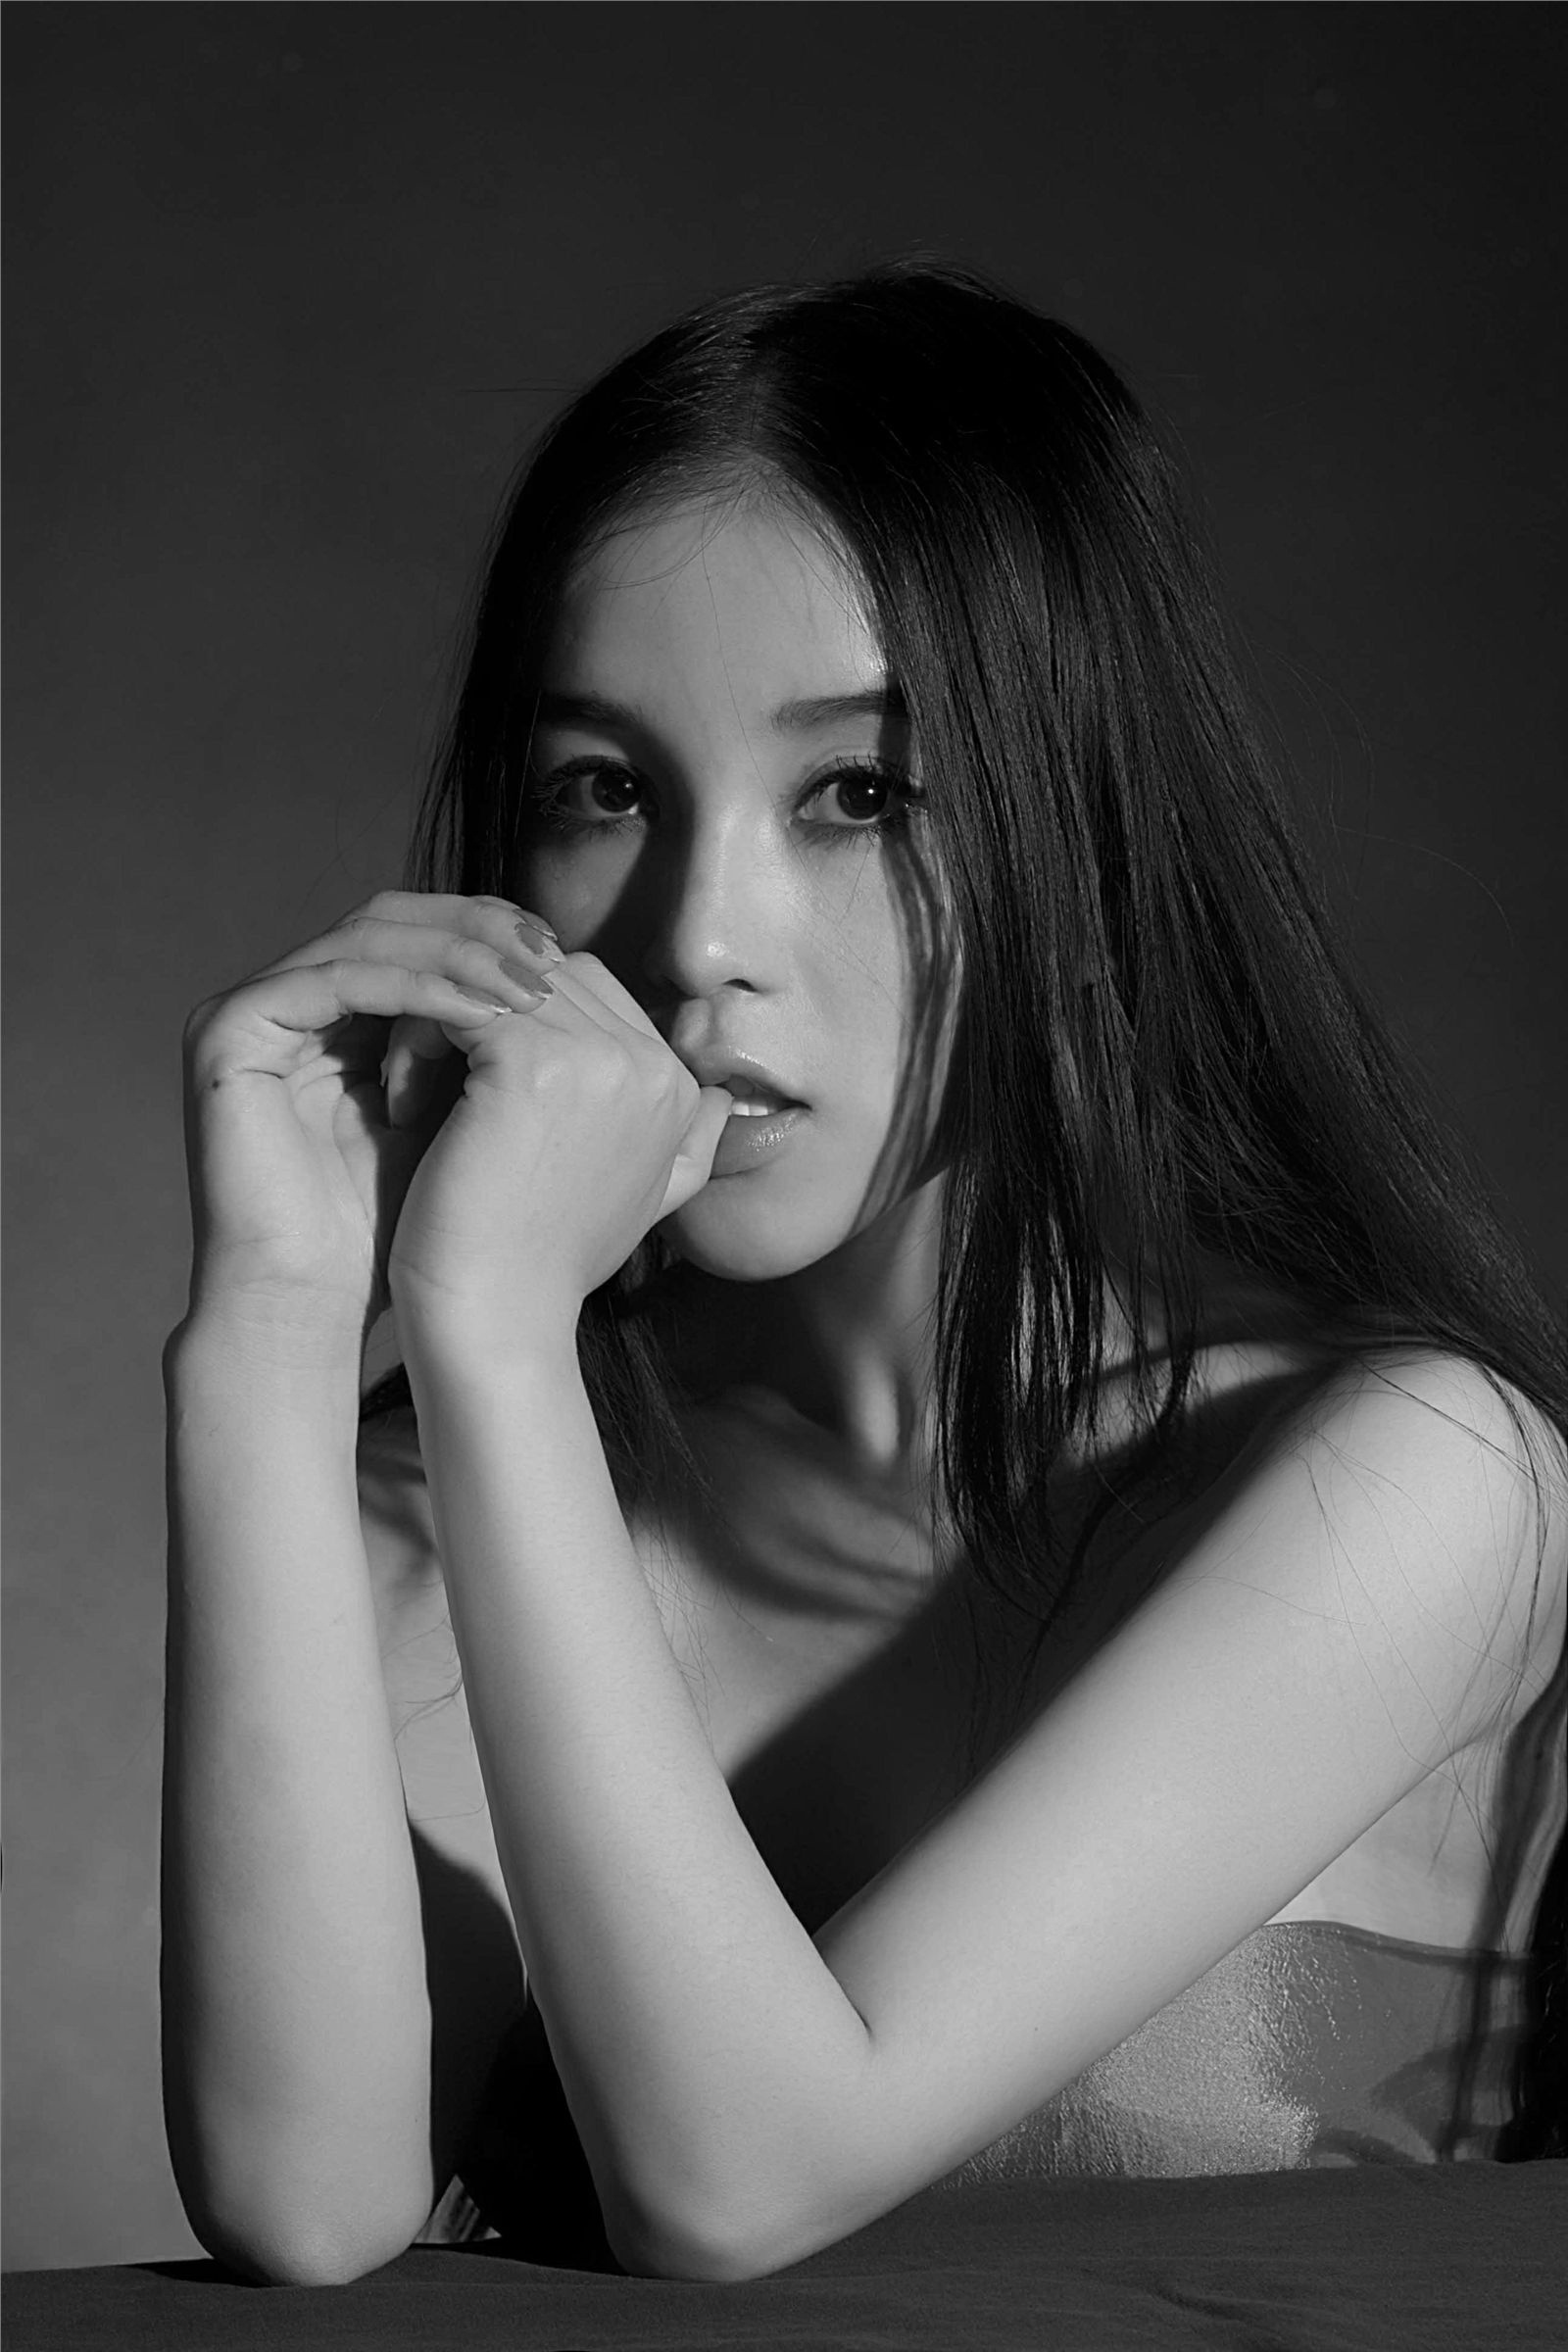 Shi Yiyi, the first half blood beauty graphic model on the Internet